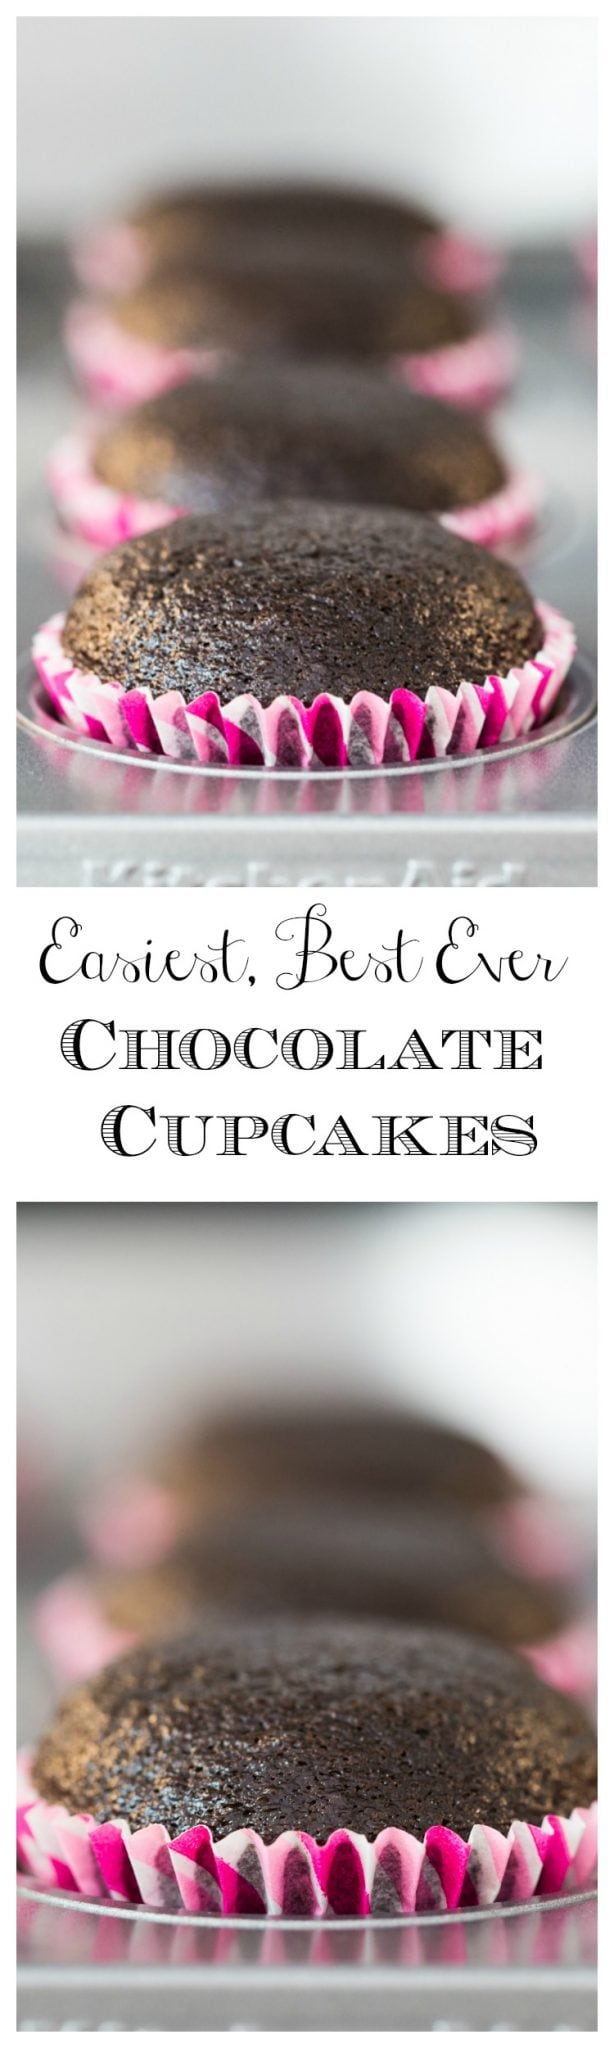 Easiest Best Ever Chocolate Cupcakes - throw these delicious, super moist, beautifully domed cupcakes together in minutes!